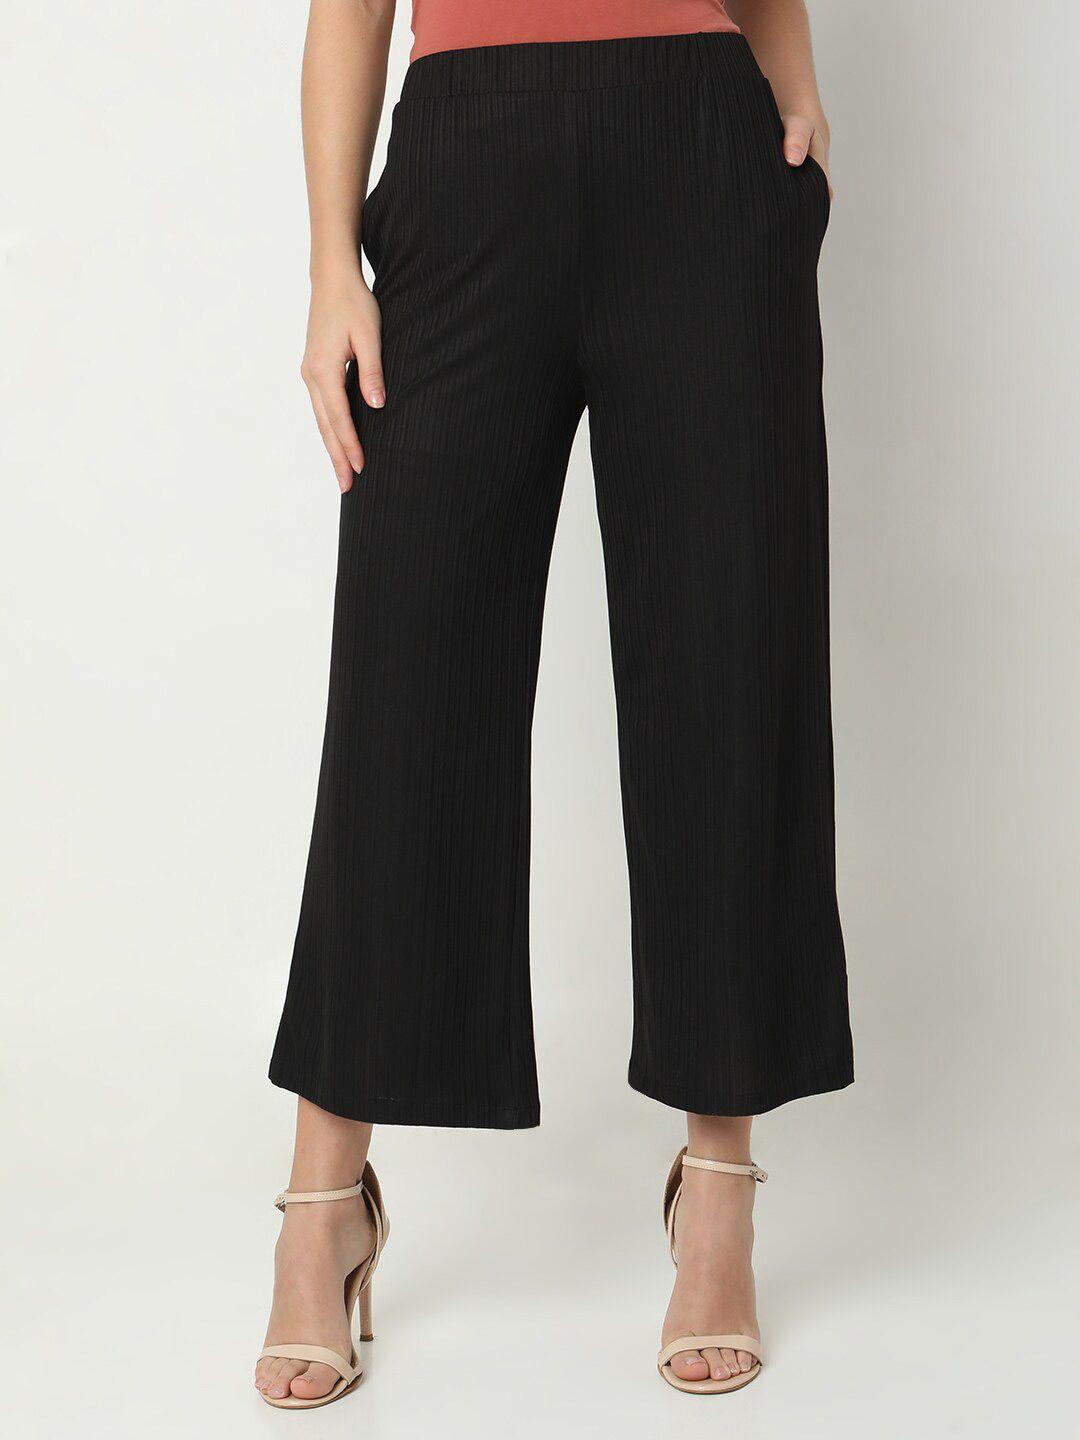 smarty-pants-women-relaxed-straight-leg-loose-fit-lint-free-culottes-cotton-trousers